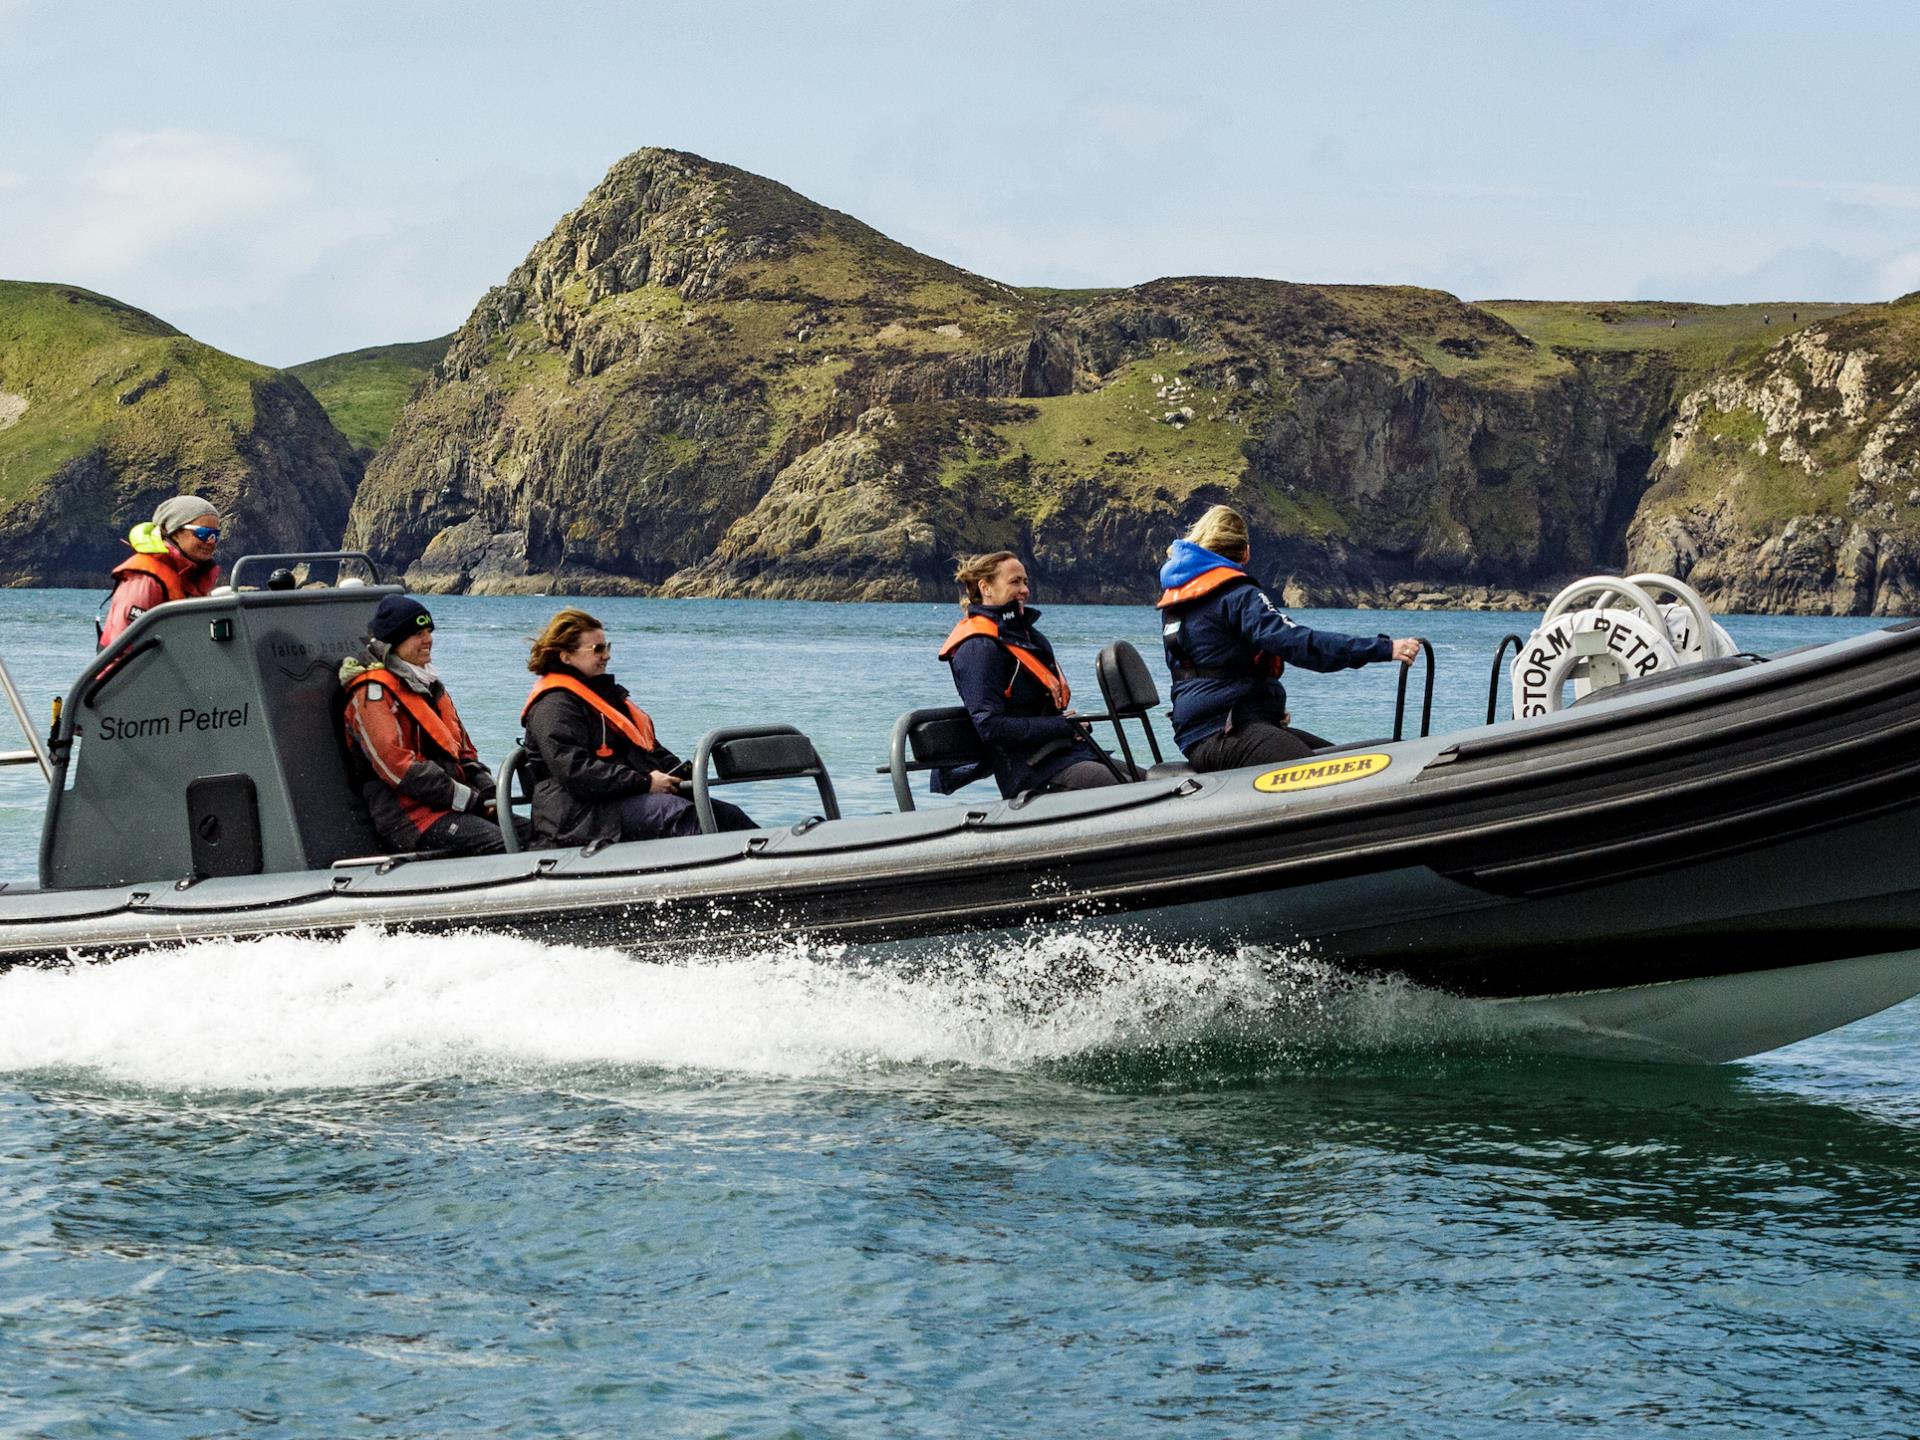 Storm Petrel, Ffion's RHIB out on the water!